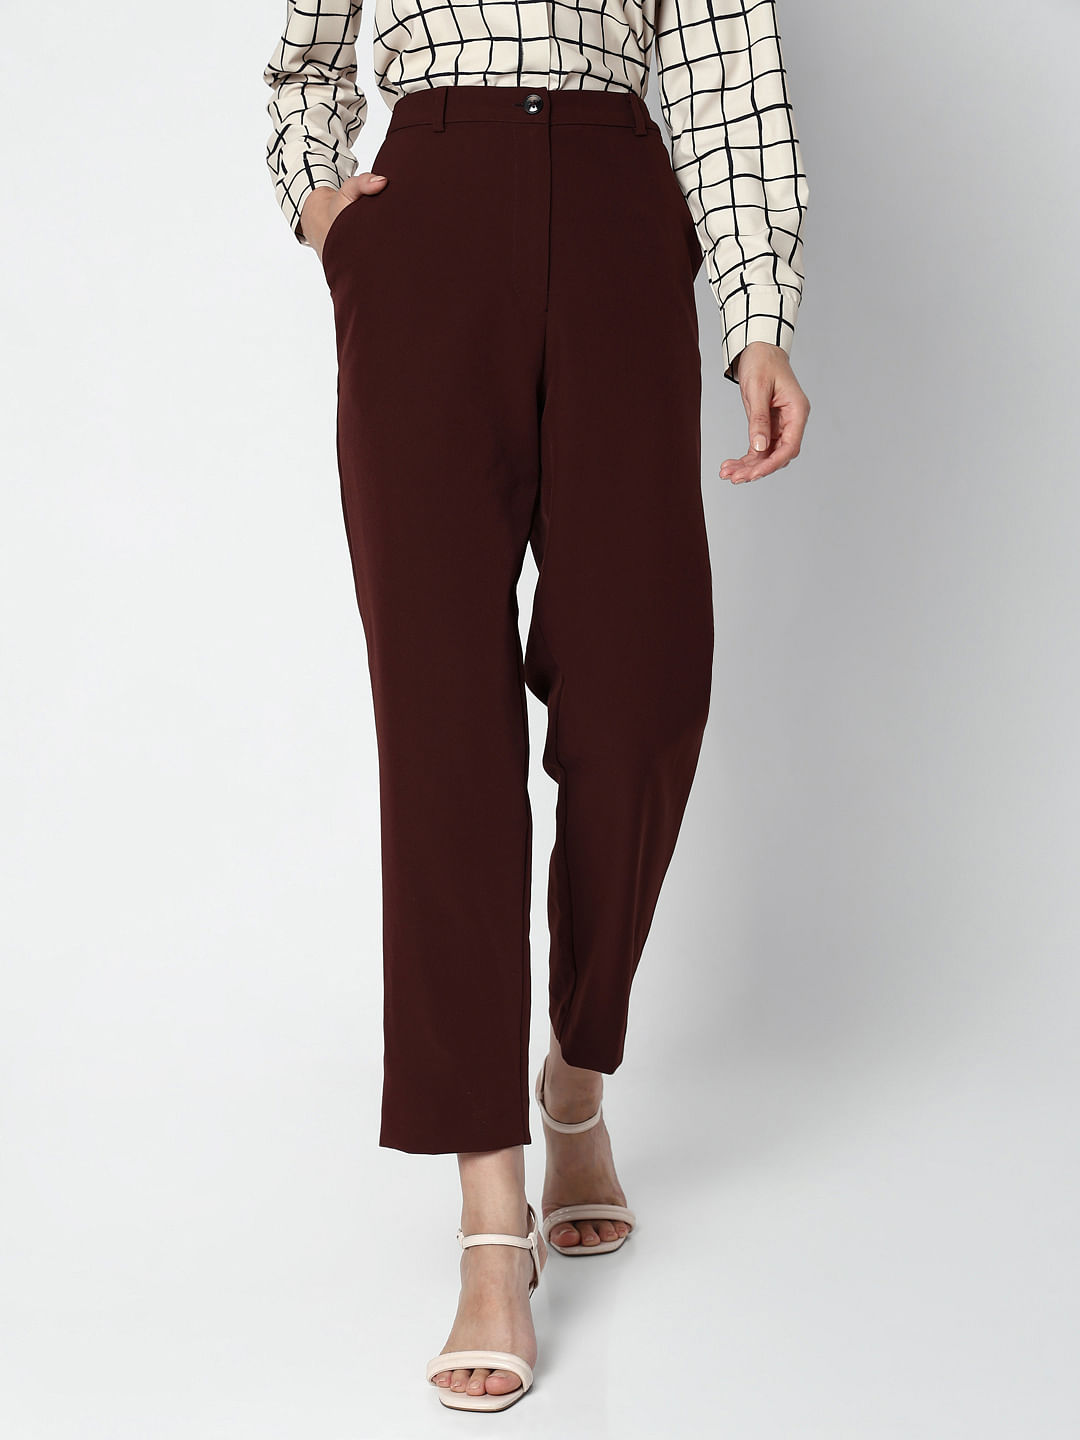 Buy Airwalk Formal/Casual Rust Color Cotton Trouser for Women at Amazon.in